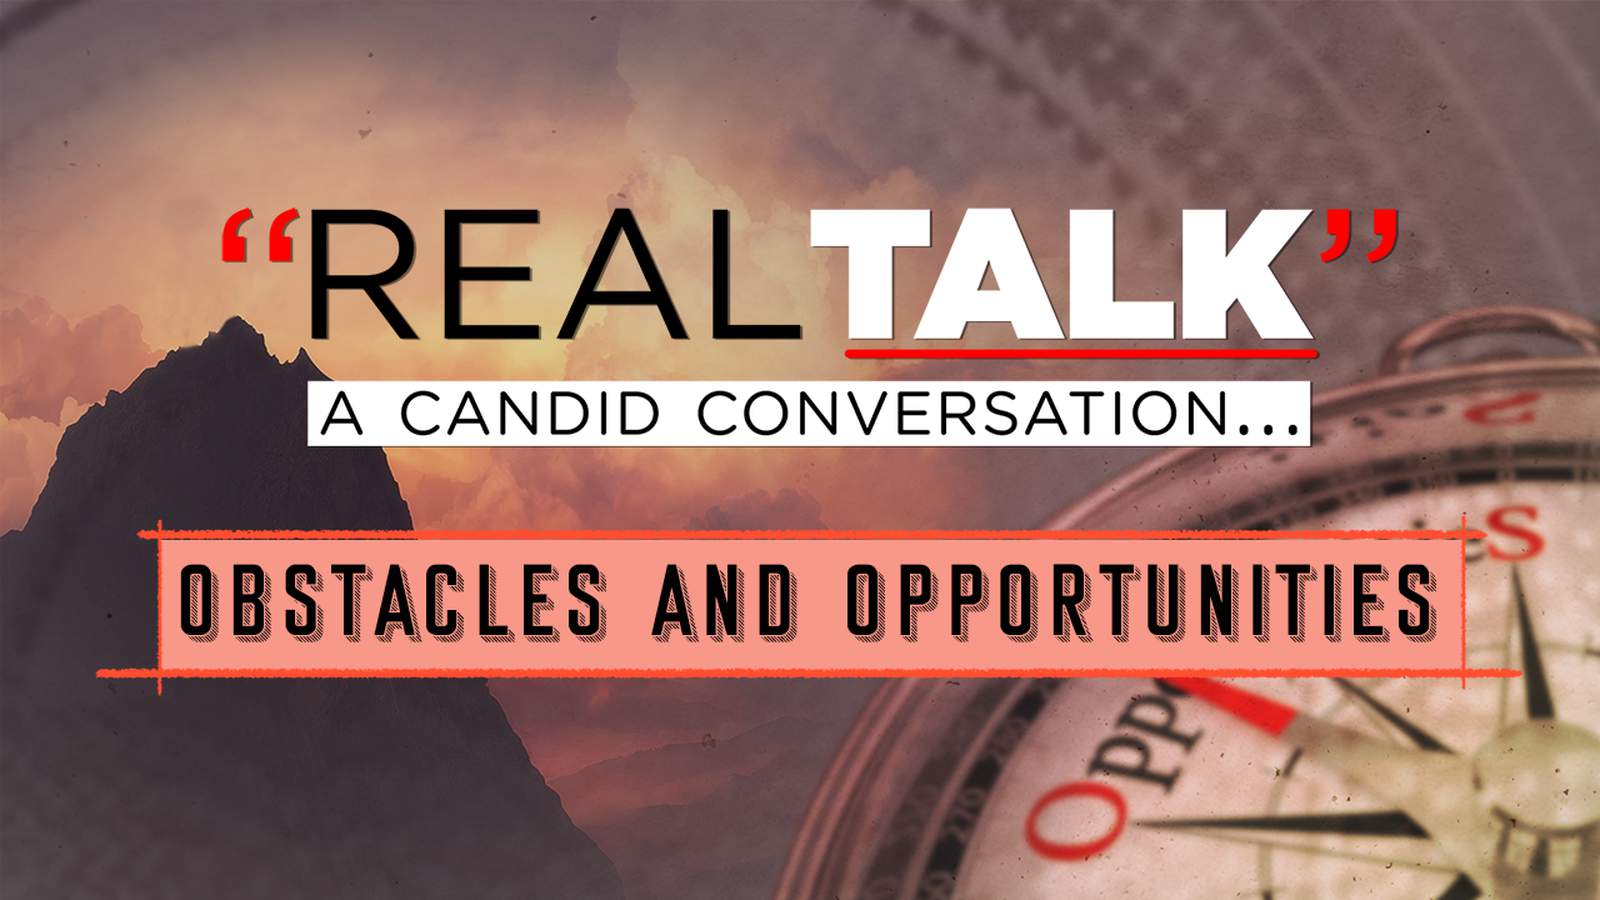 REWATCH: News 6 hosts Real Talk: Obstacles and Opportunities town hall